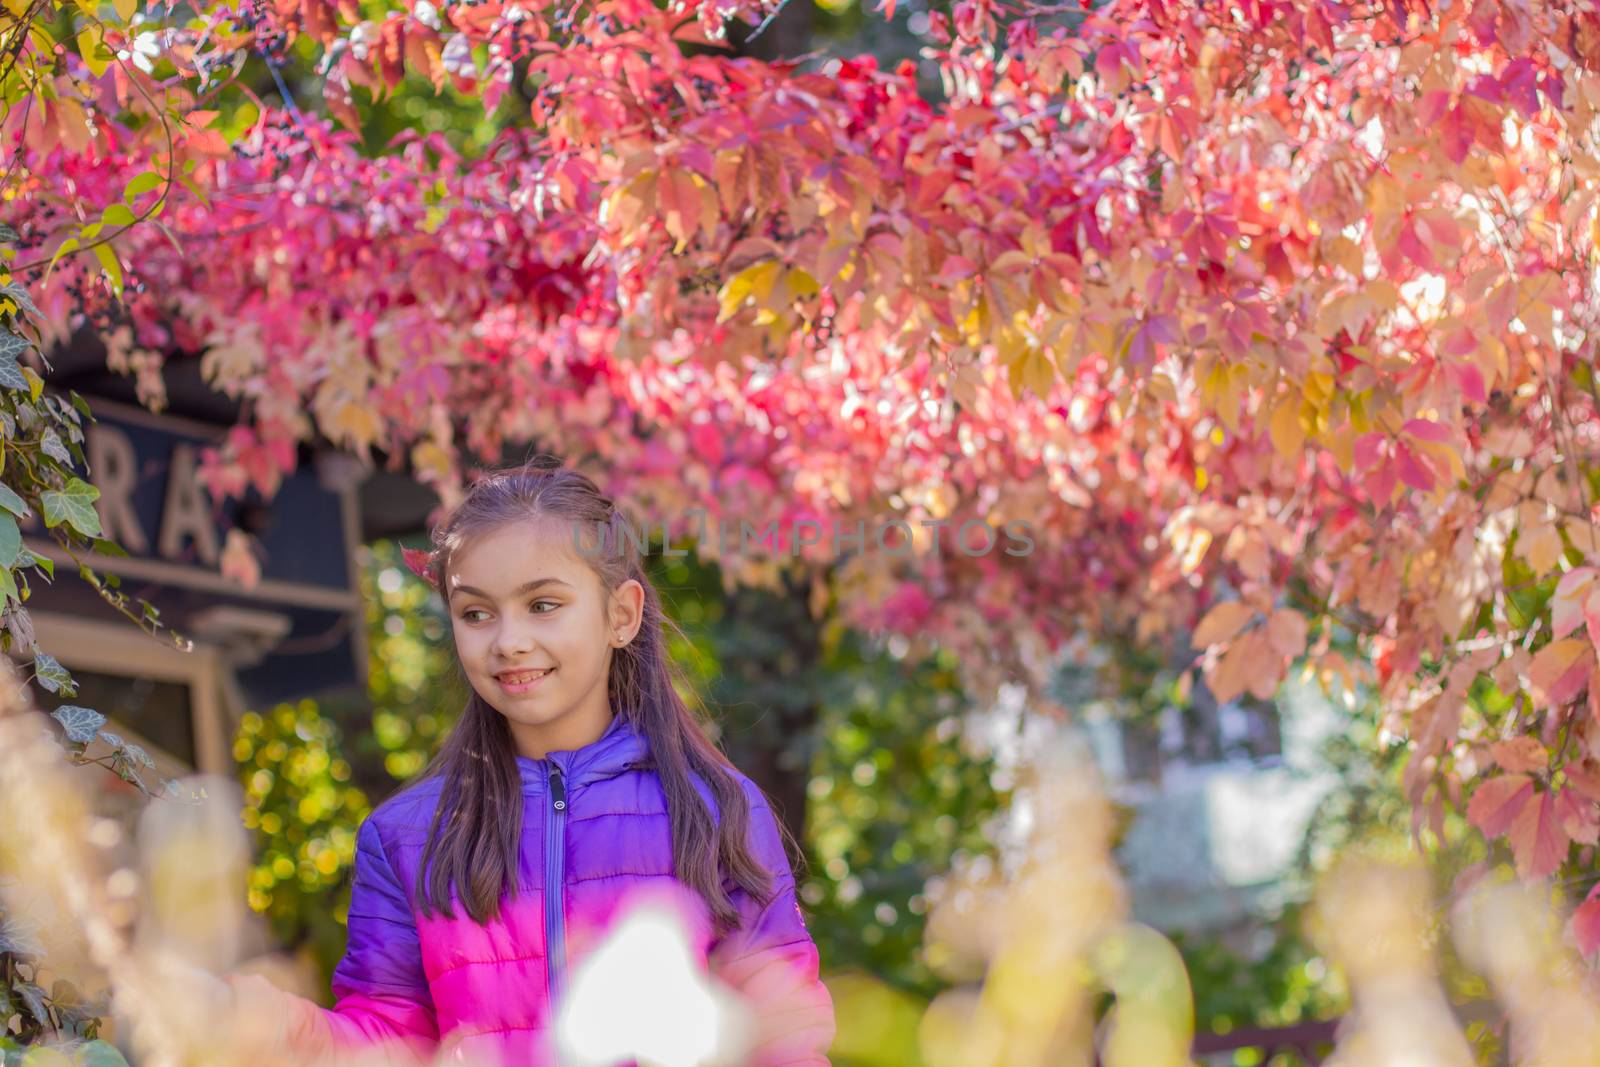 Smiling girl among red leaves by Angel_a